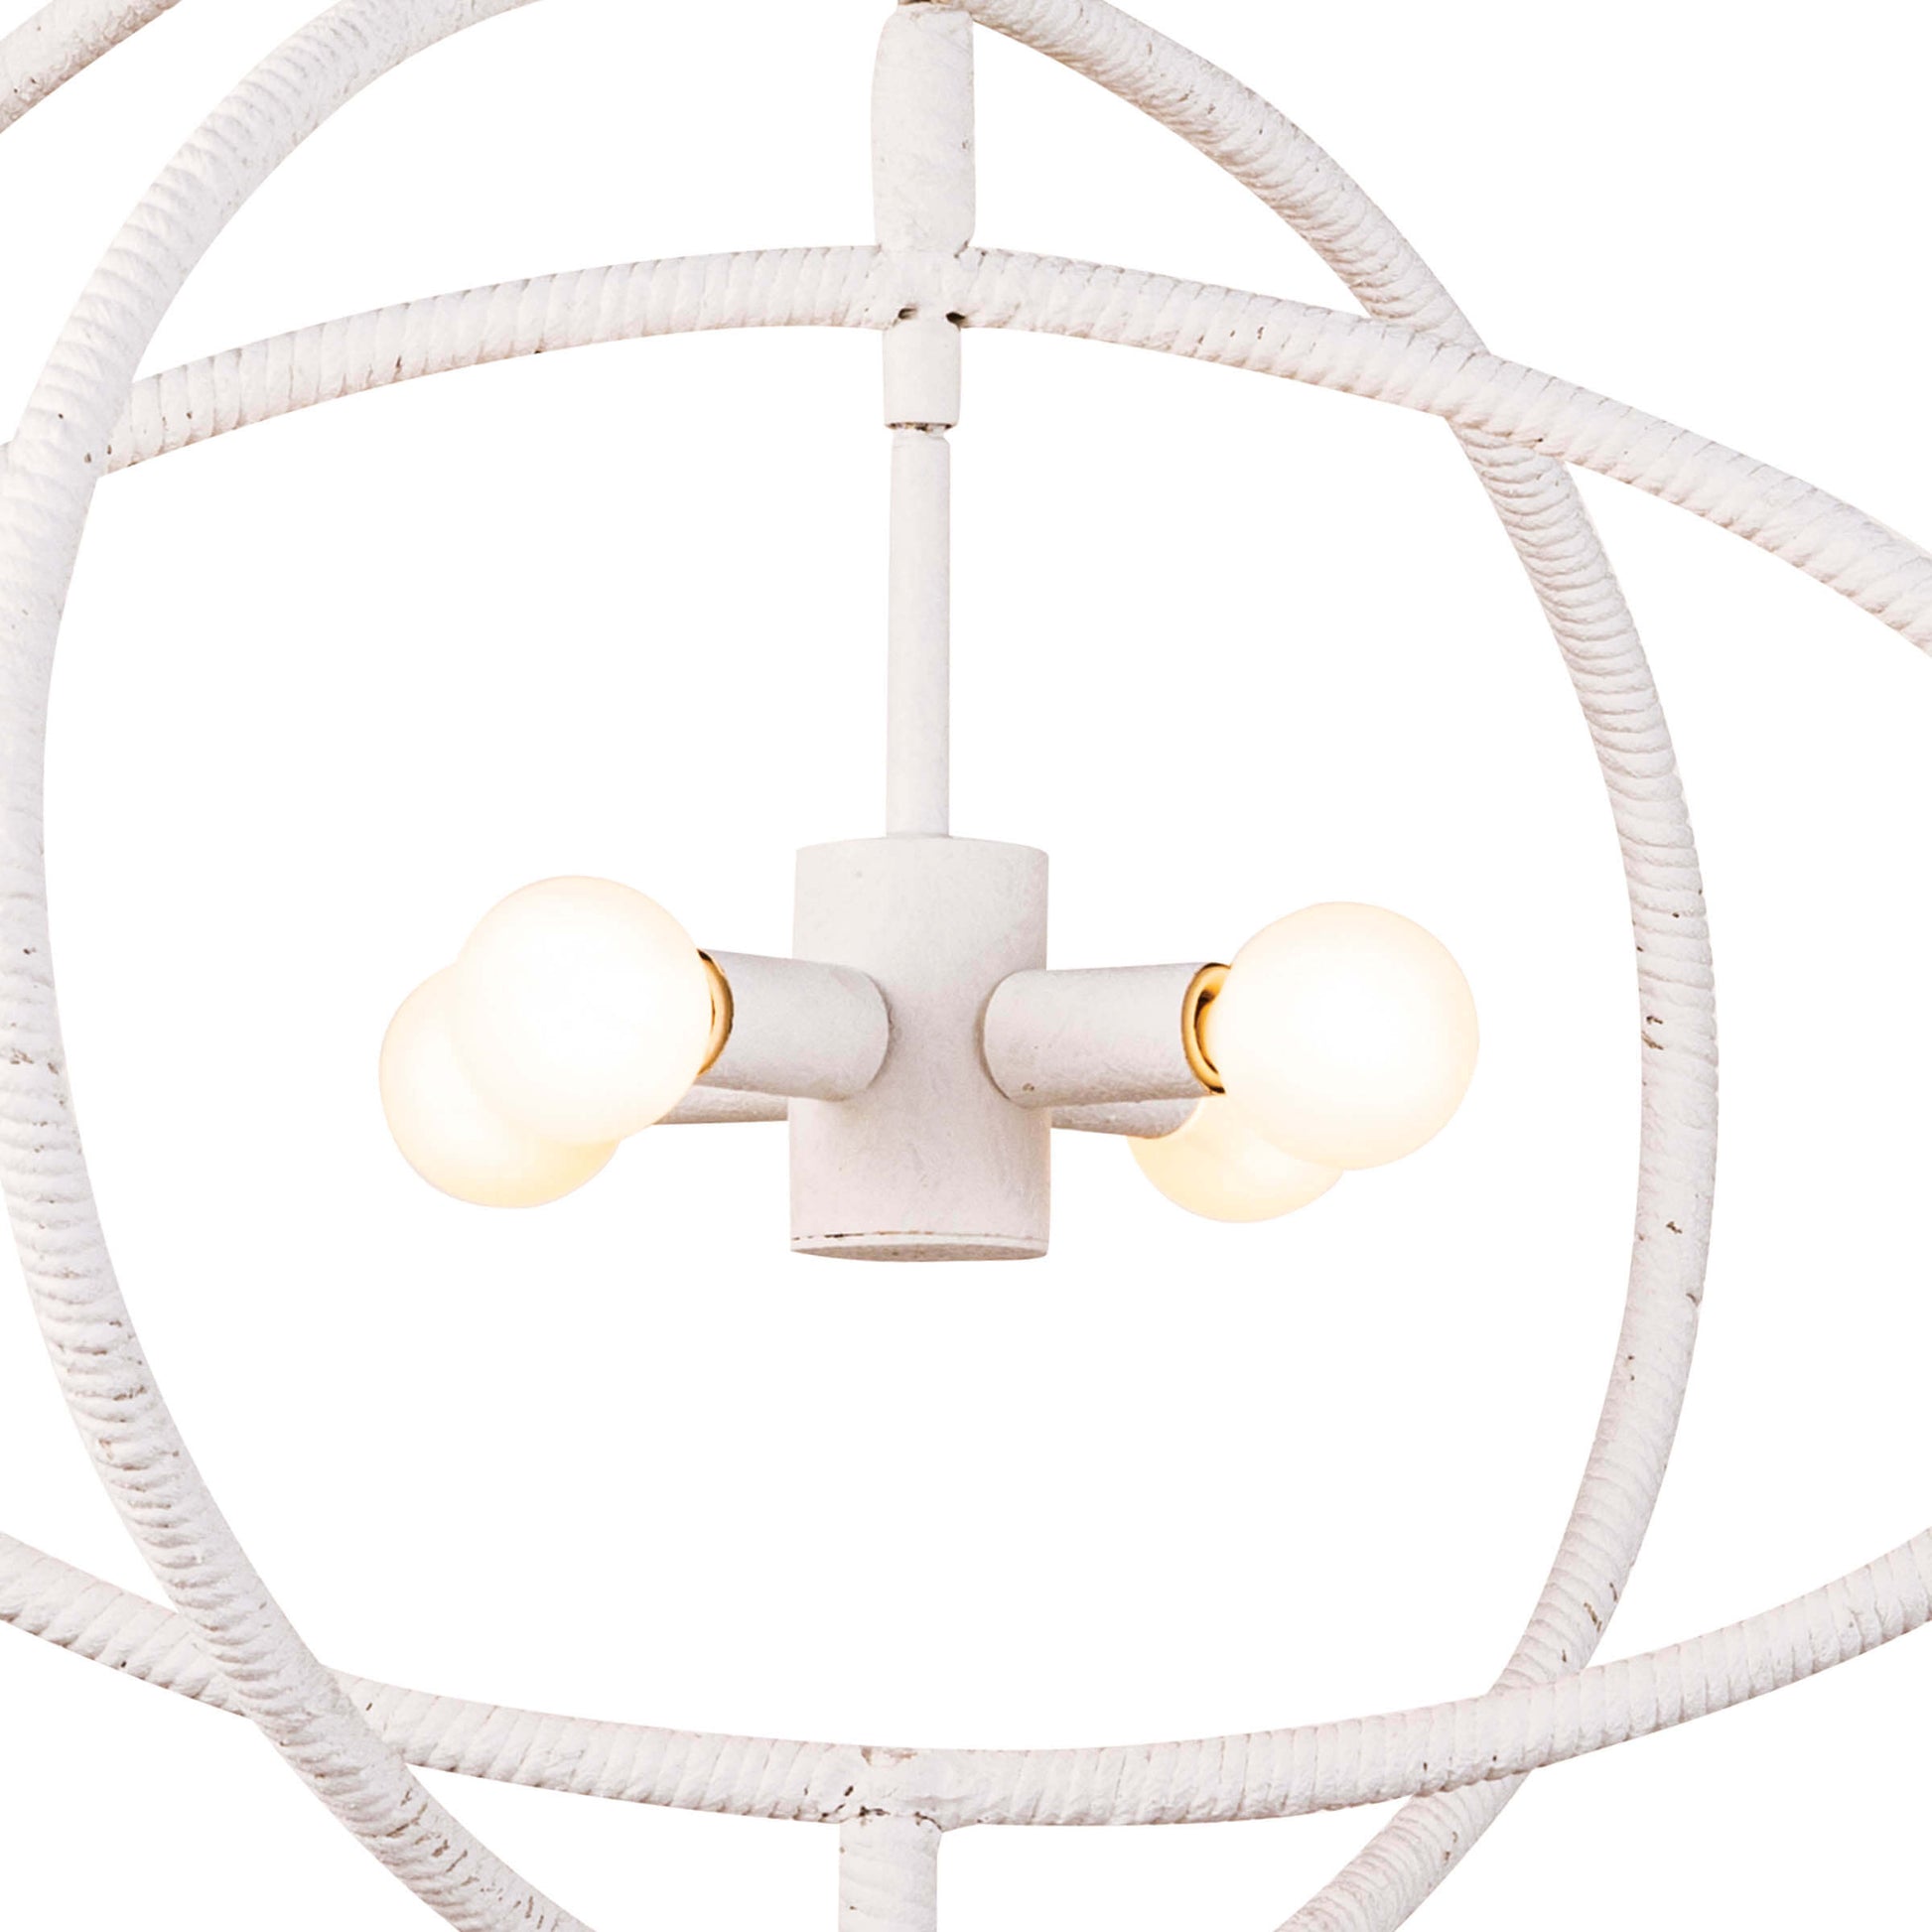 Sail Chandelier by Coastal Living